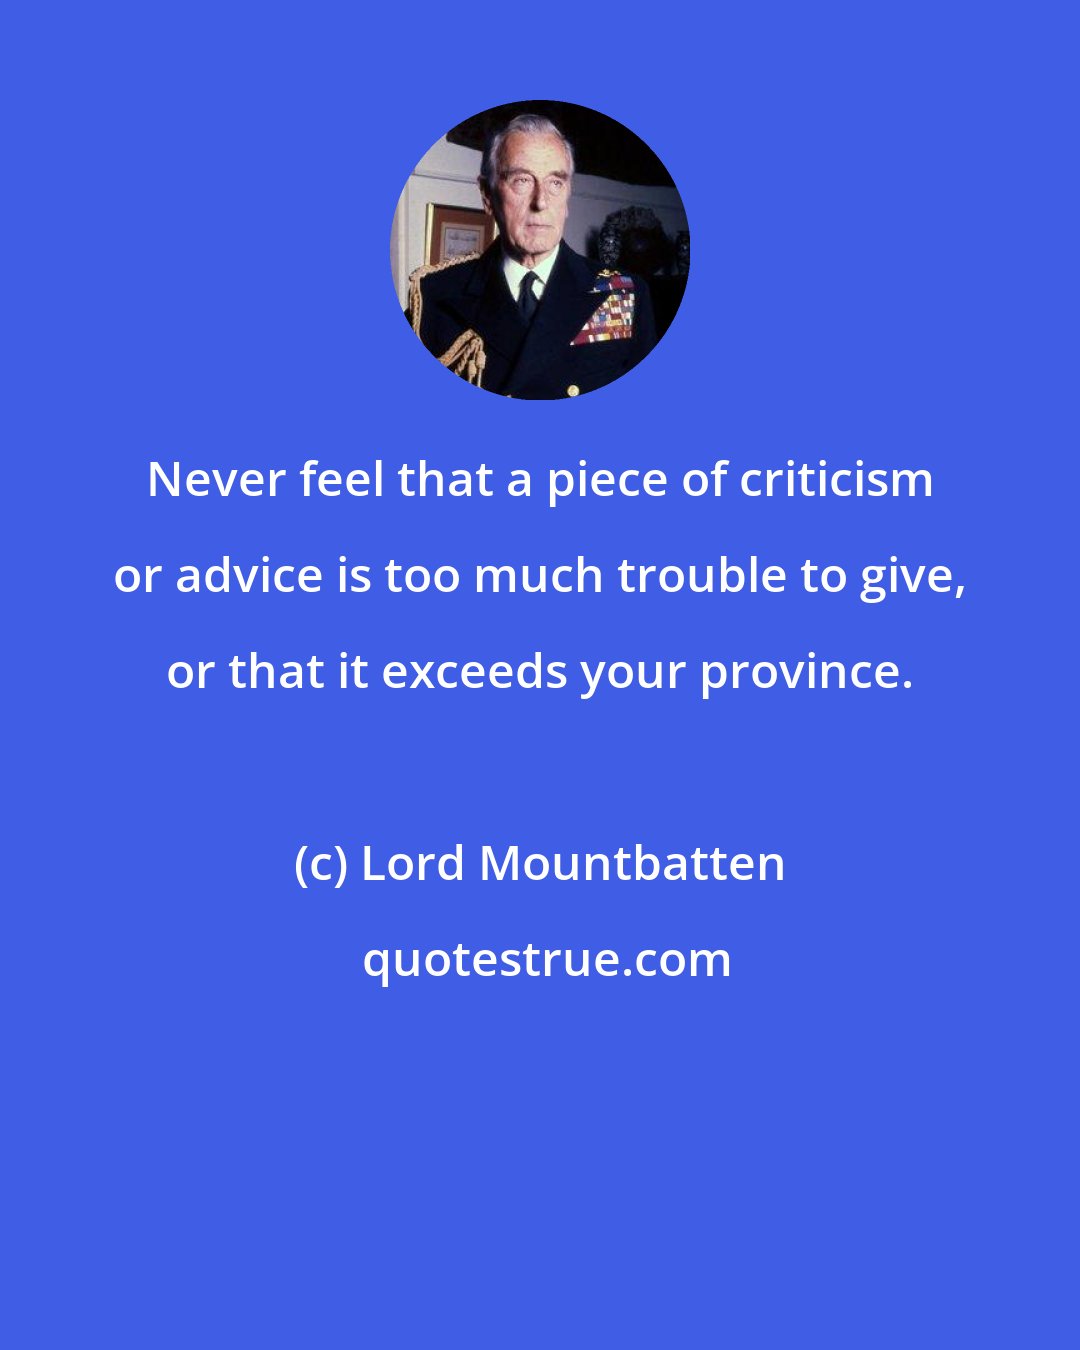 Lord Mountbatten: Never feel that a piece of criticism or advice is too much trouble to give, or that it exceeds your province.